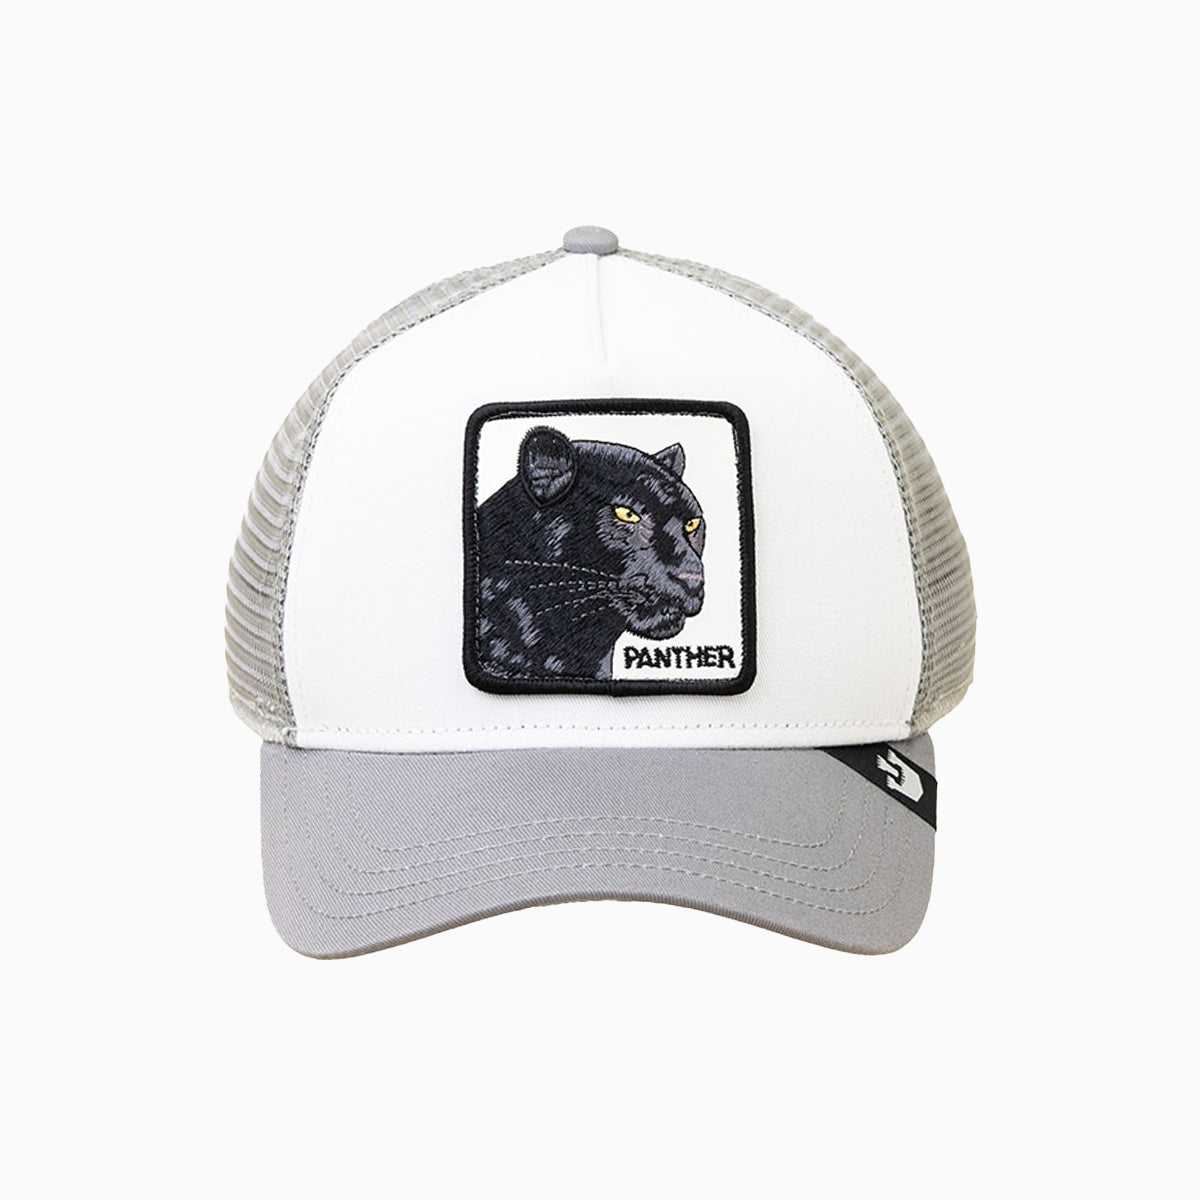 The Panther Trucker Hat